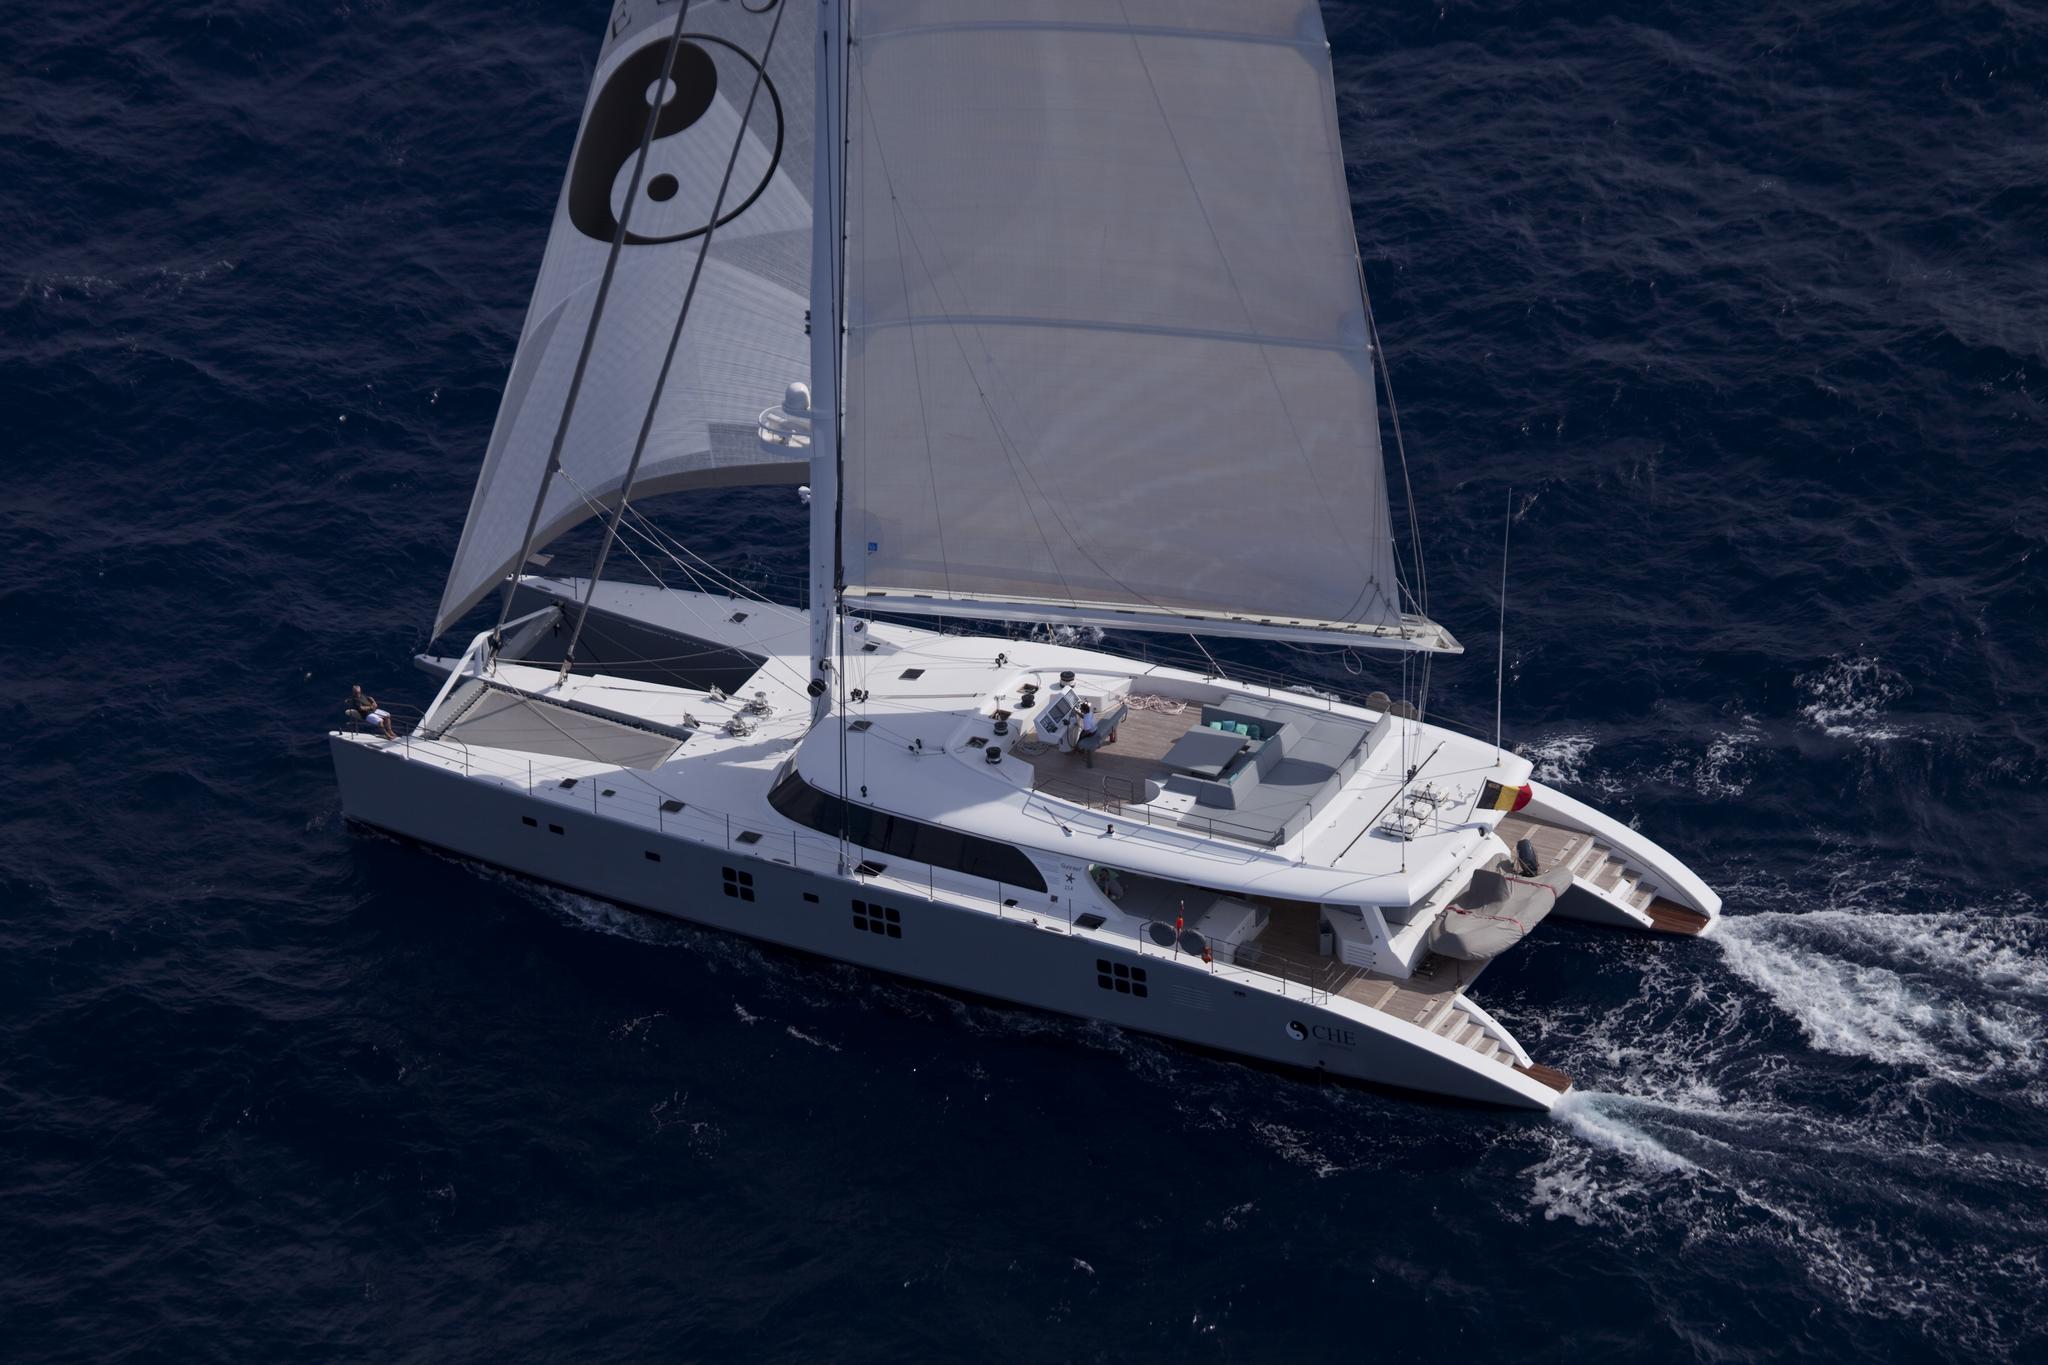 Launched Sail Catamaran for Sale  Sunreef 114 Boat Highlights